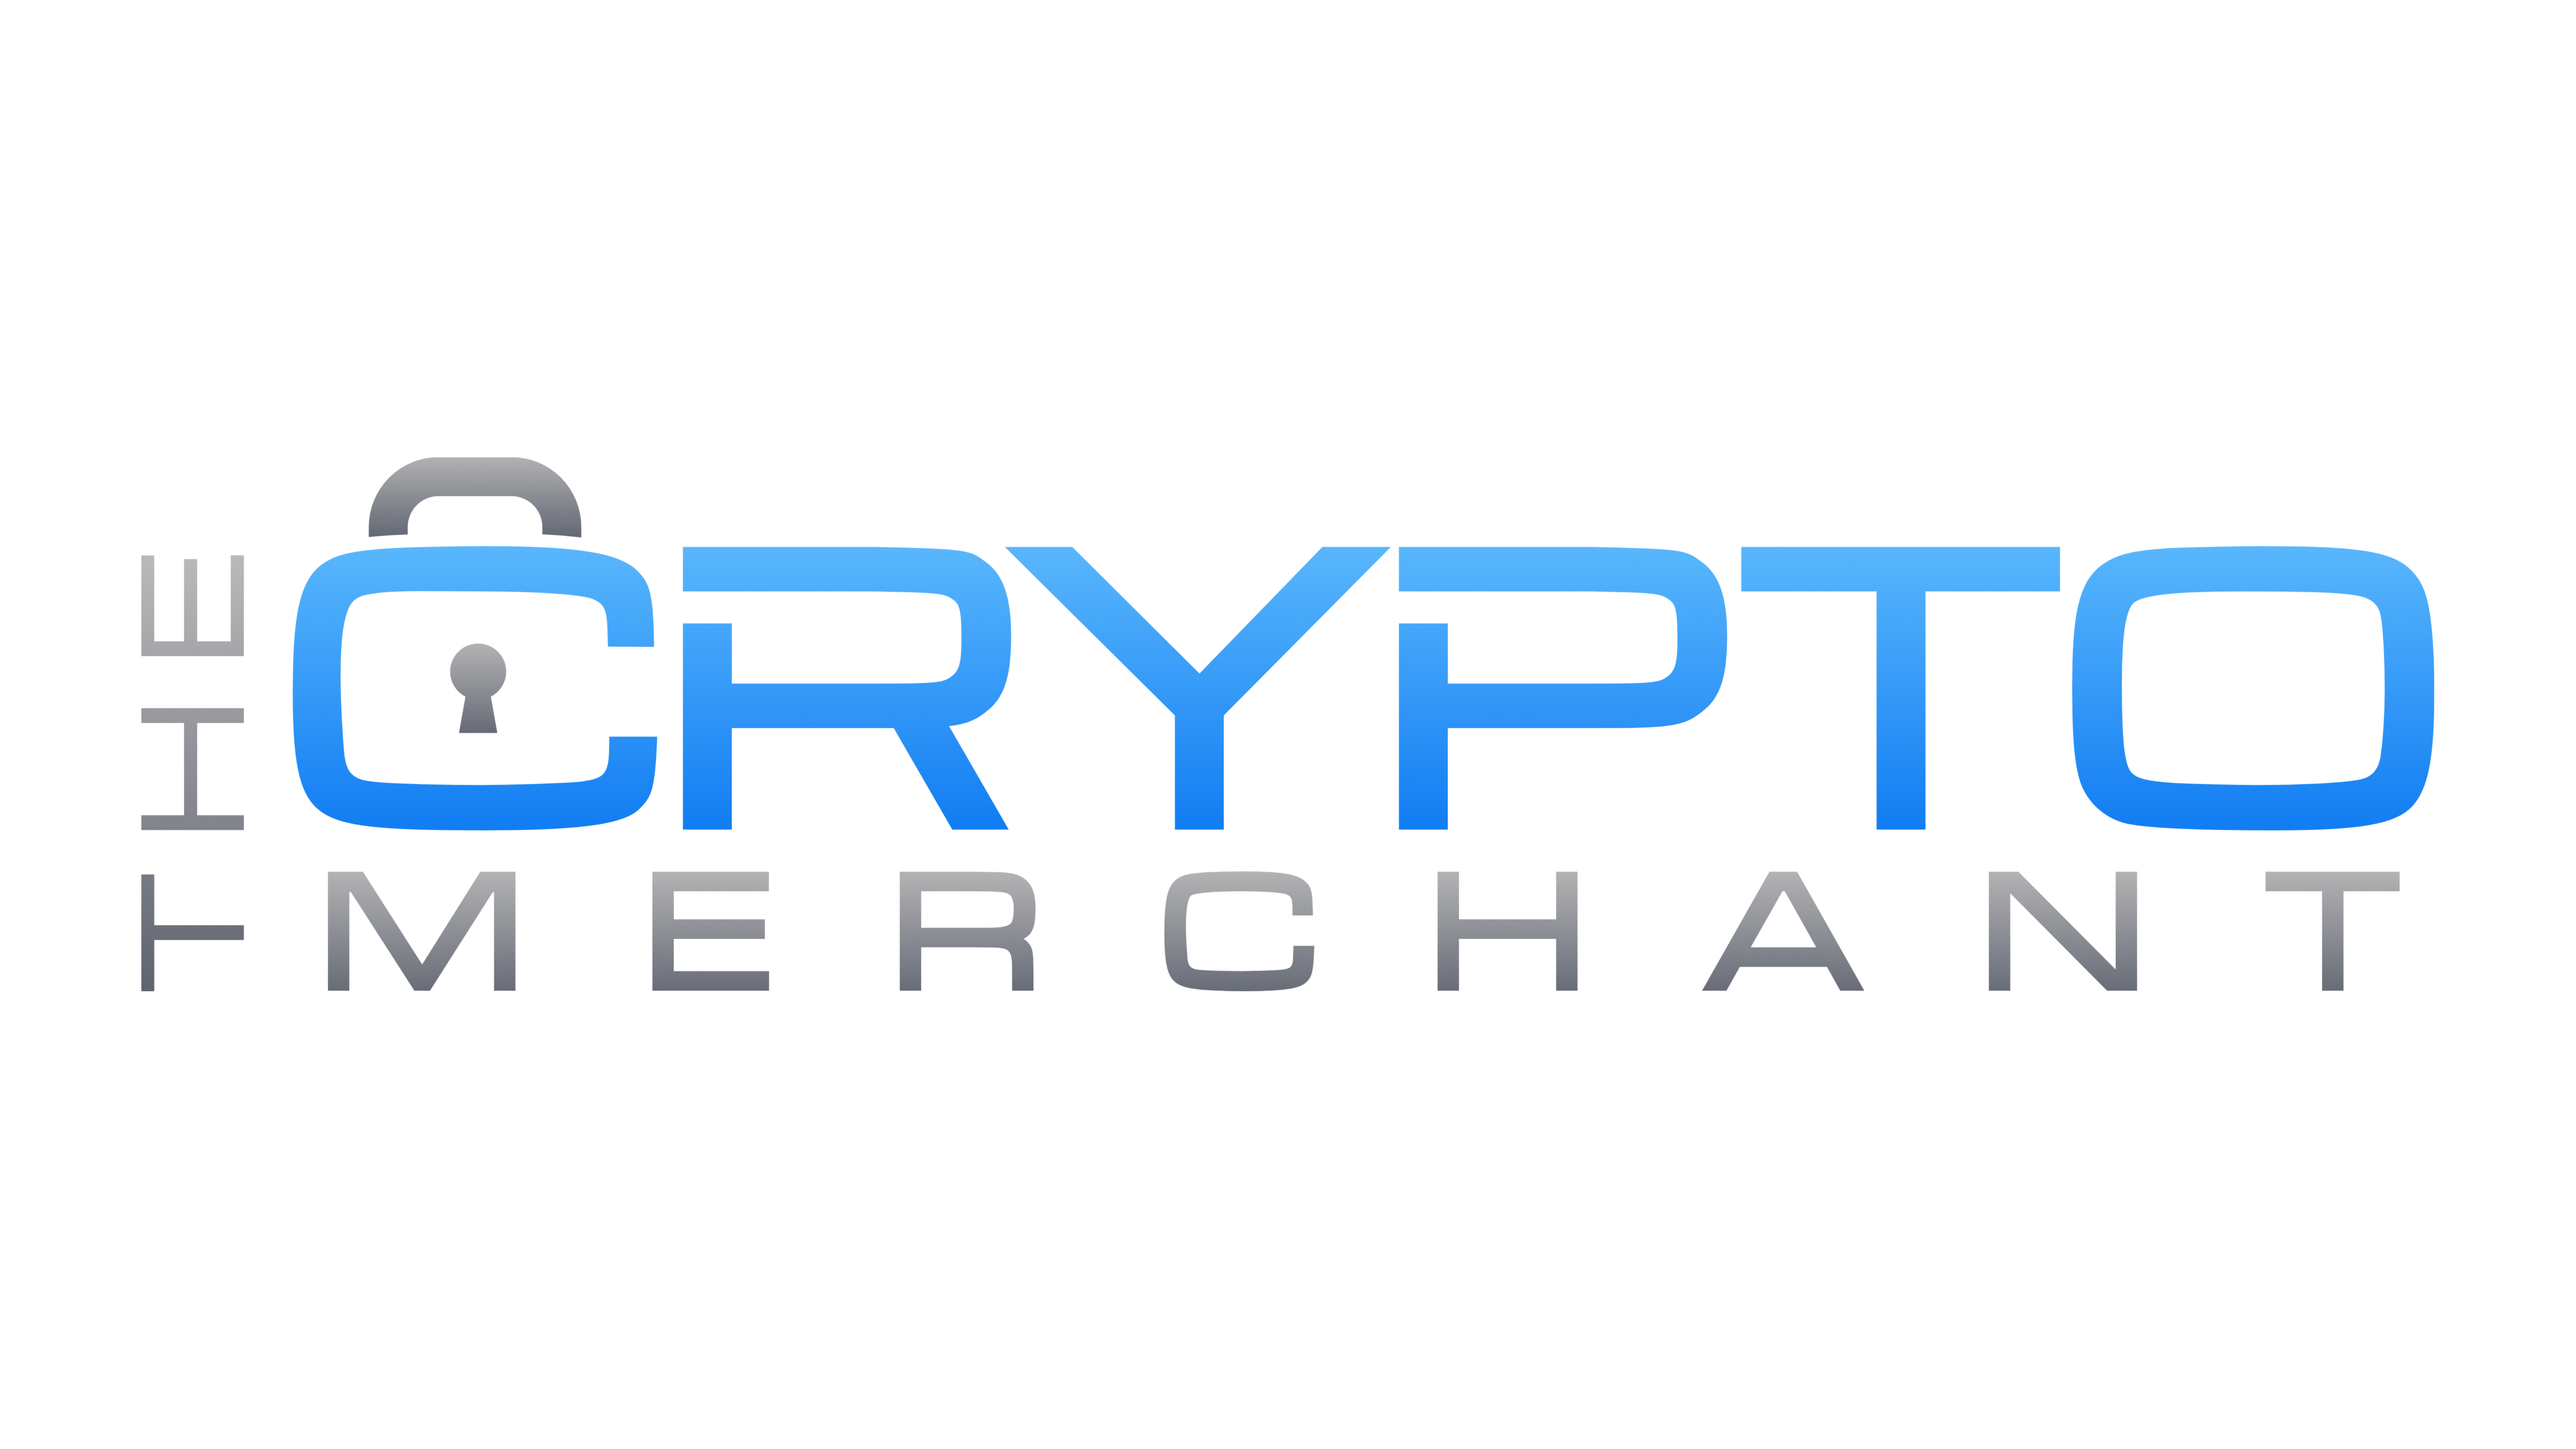 Get The Best Bitcoin, Monero & Litecoin T-Shirts From This Crypto Apparel Store